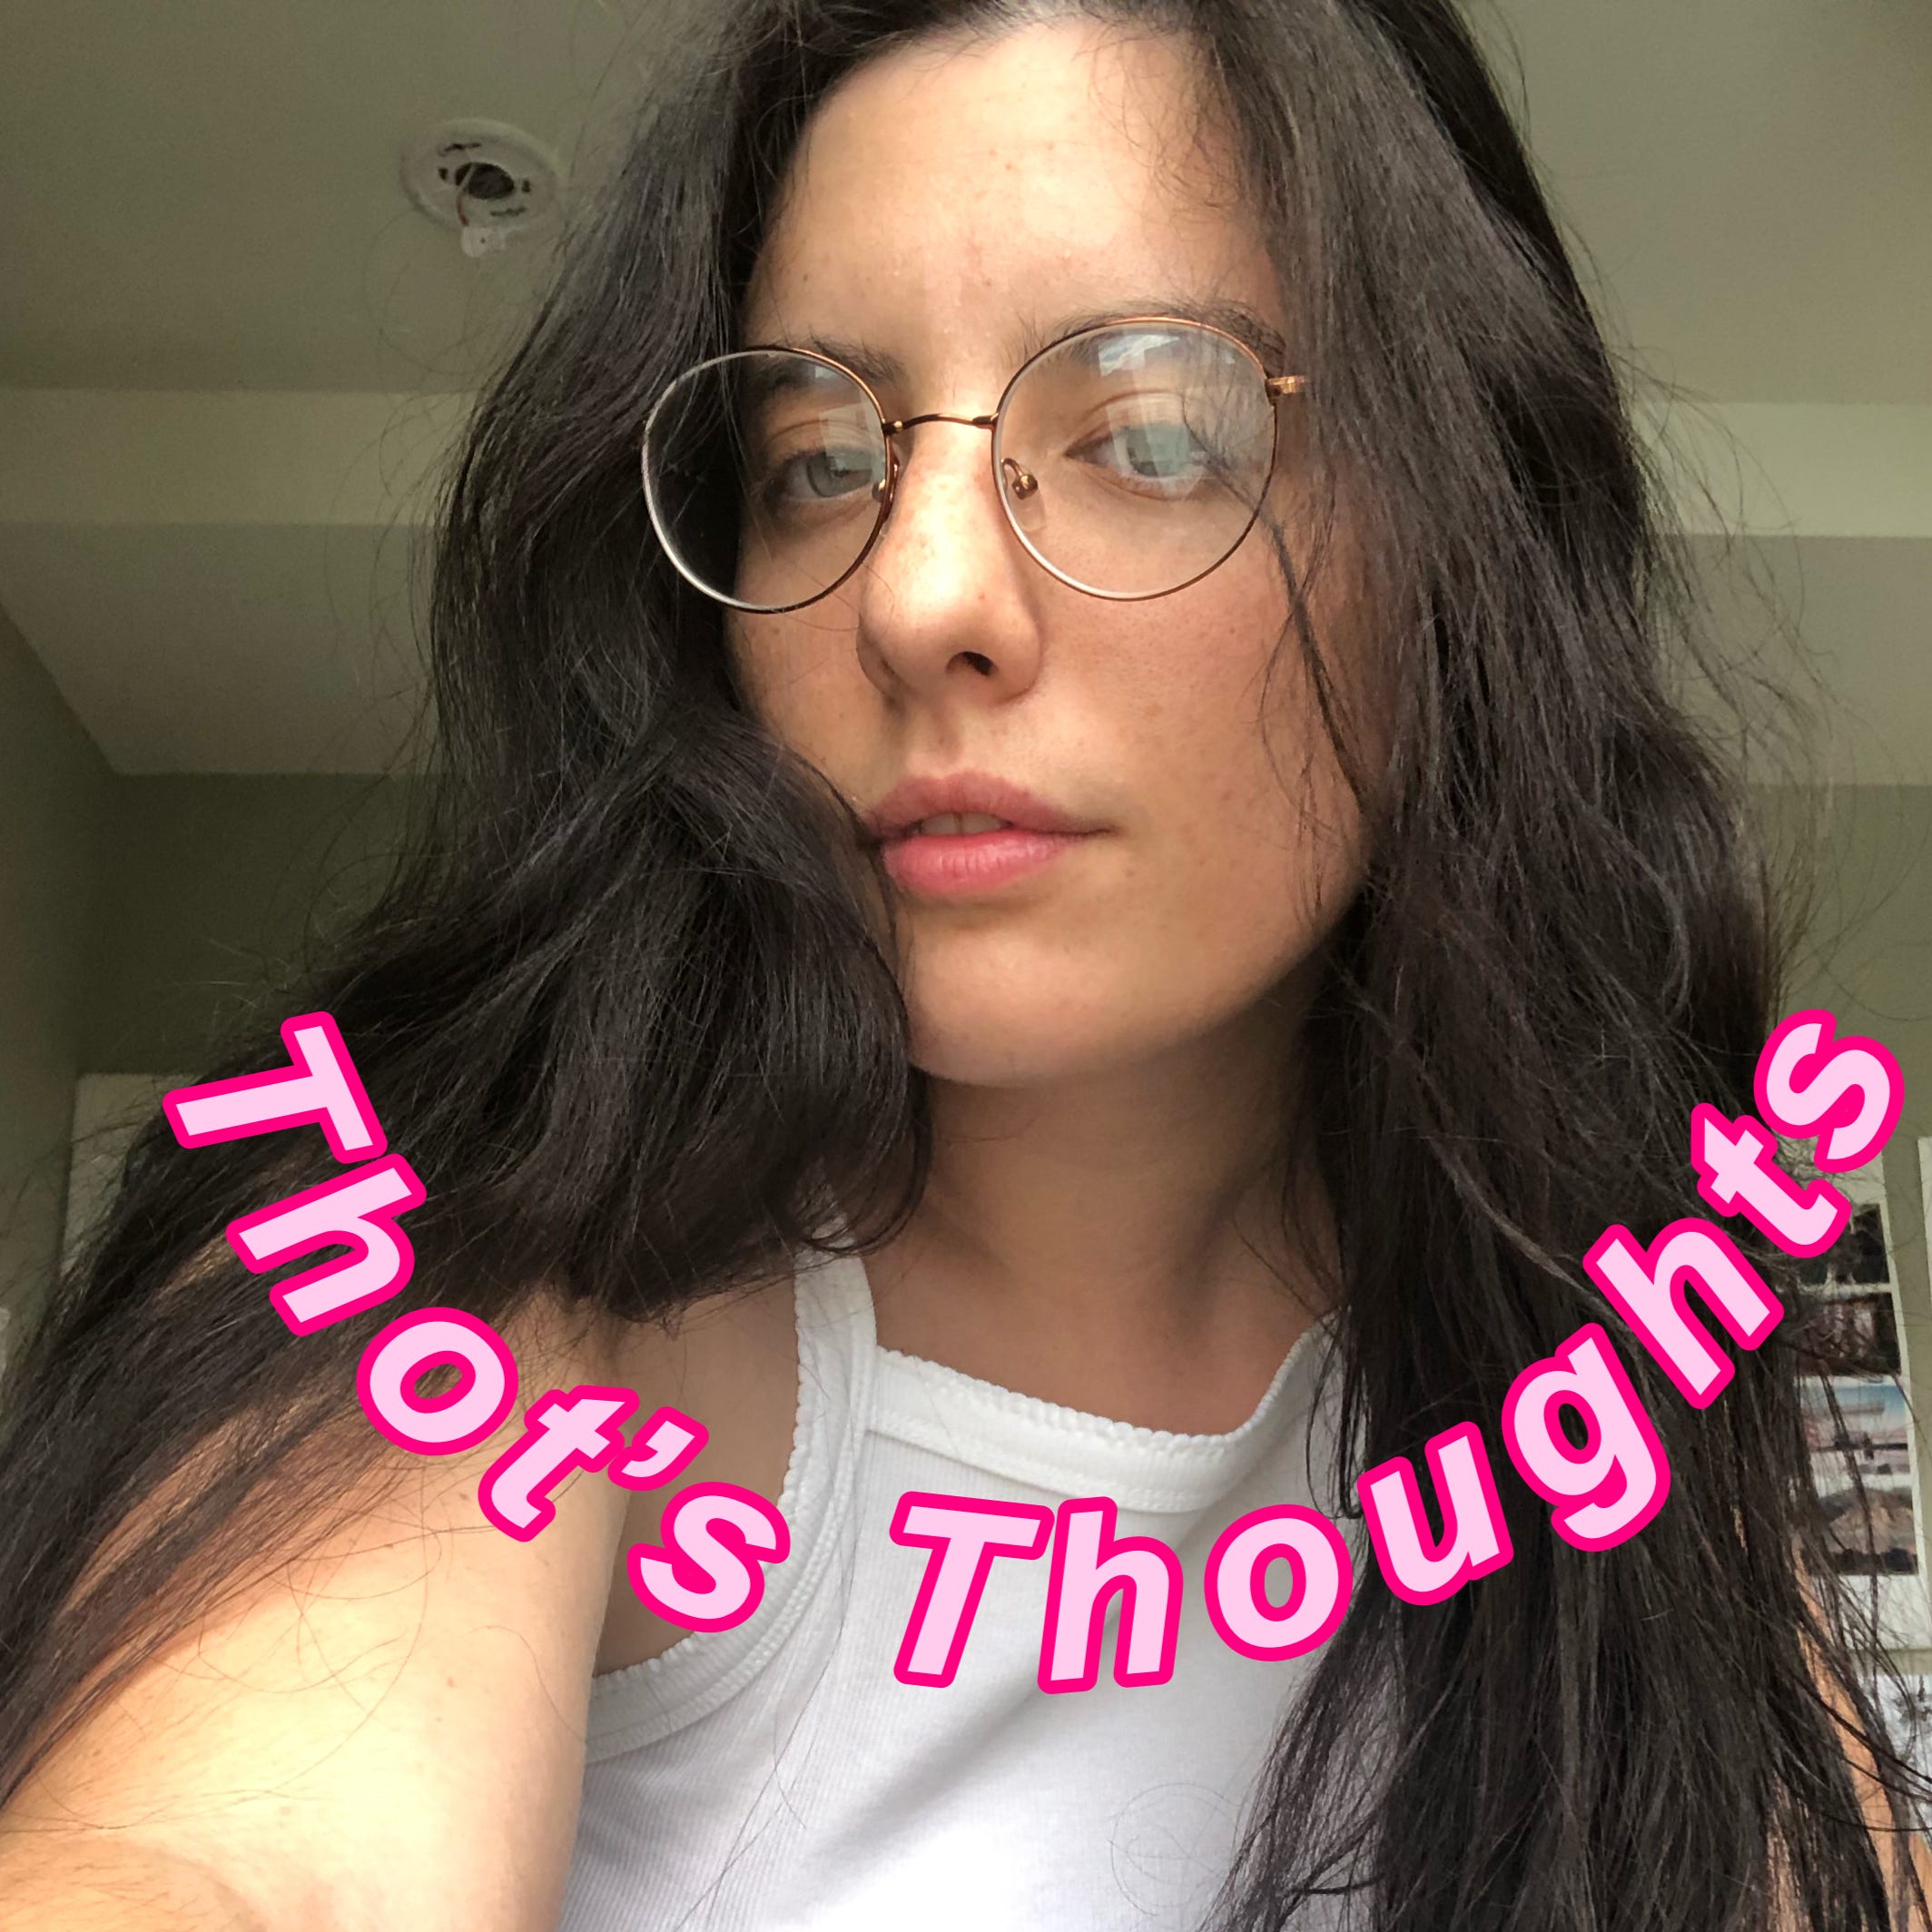 Thot's Thoughts